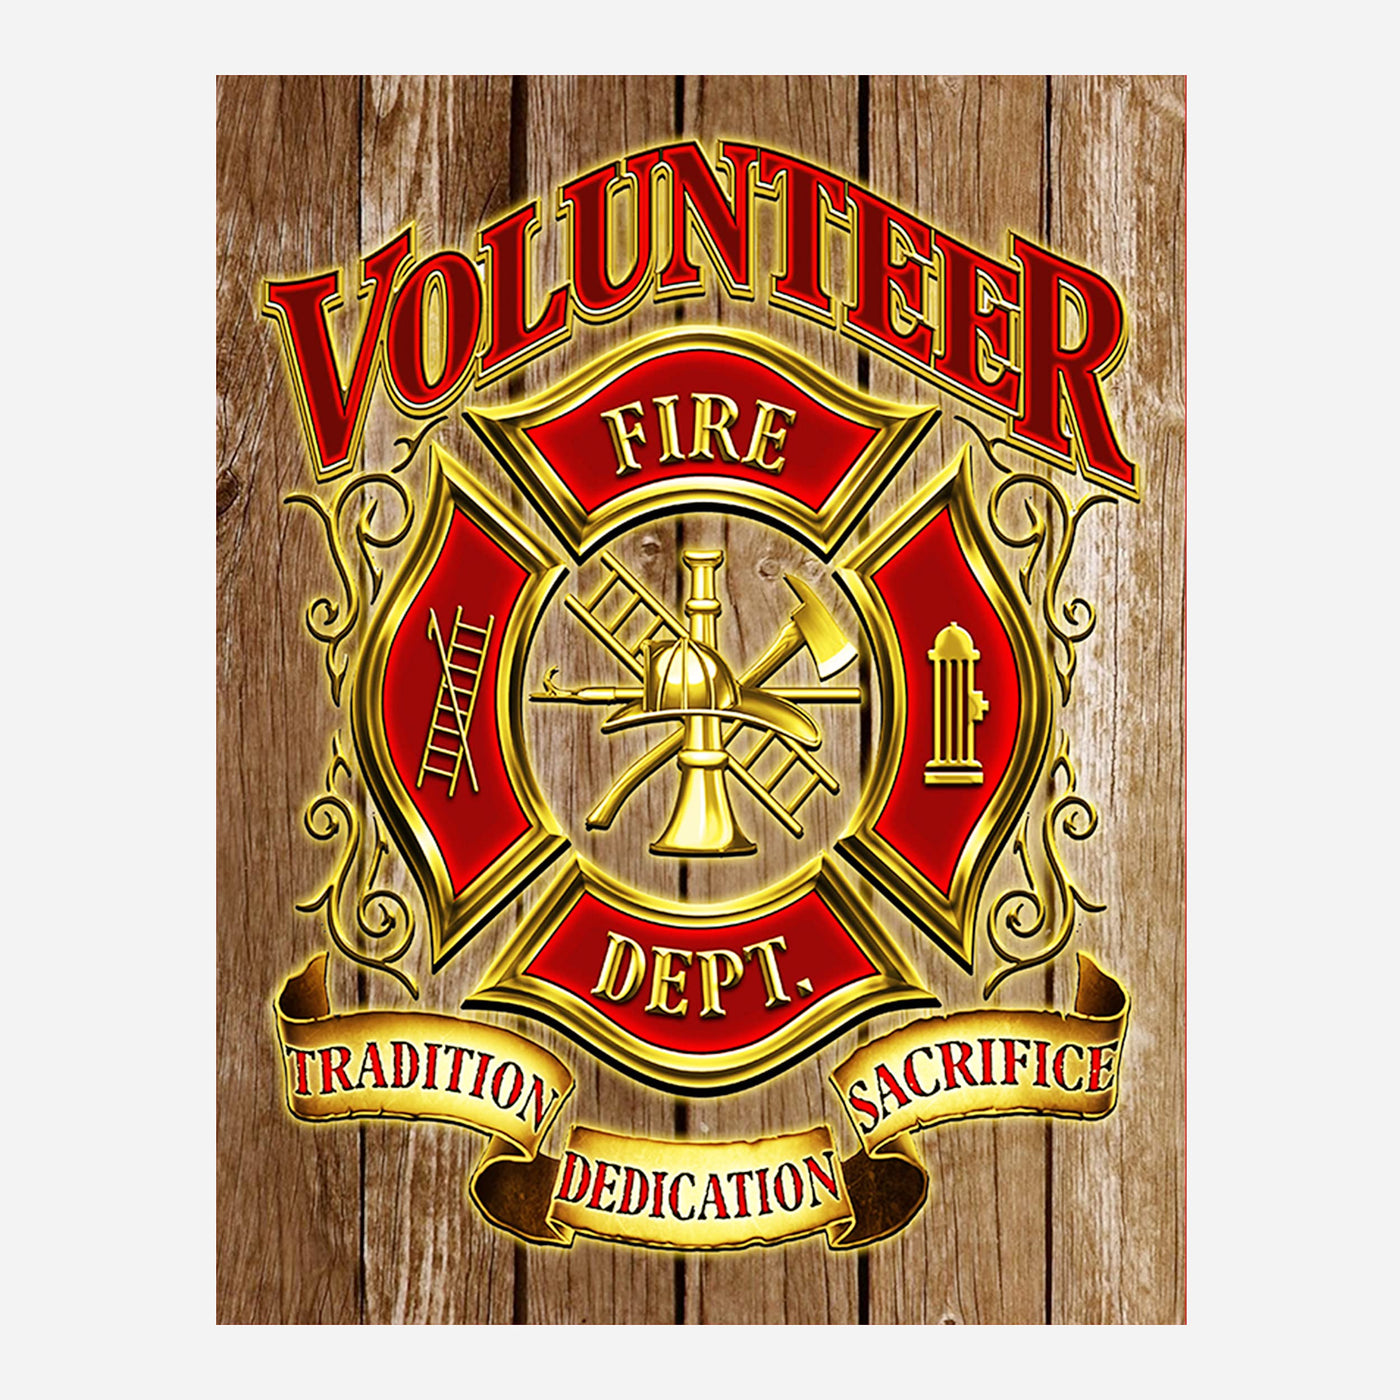 Fire Department Vintage Signs- 4 Image Set- 8 x10"s Wall Decor Prints- Ready To Frame. Great Gift for All Firemen- Home Decor- Office Decor. Perfect for Man Cave- Bar- Garage-Fire Stations!